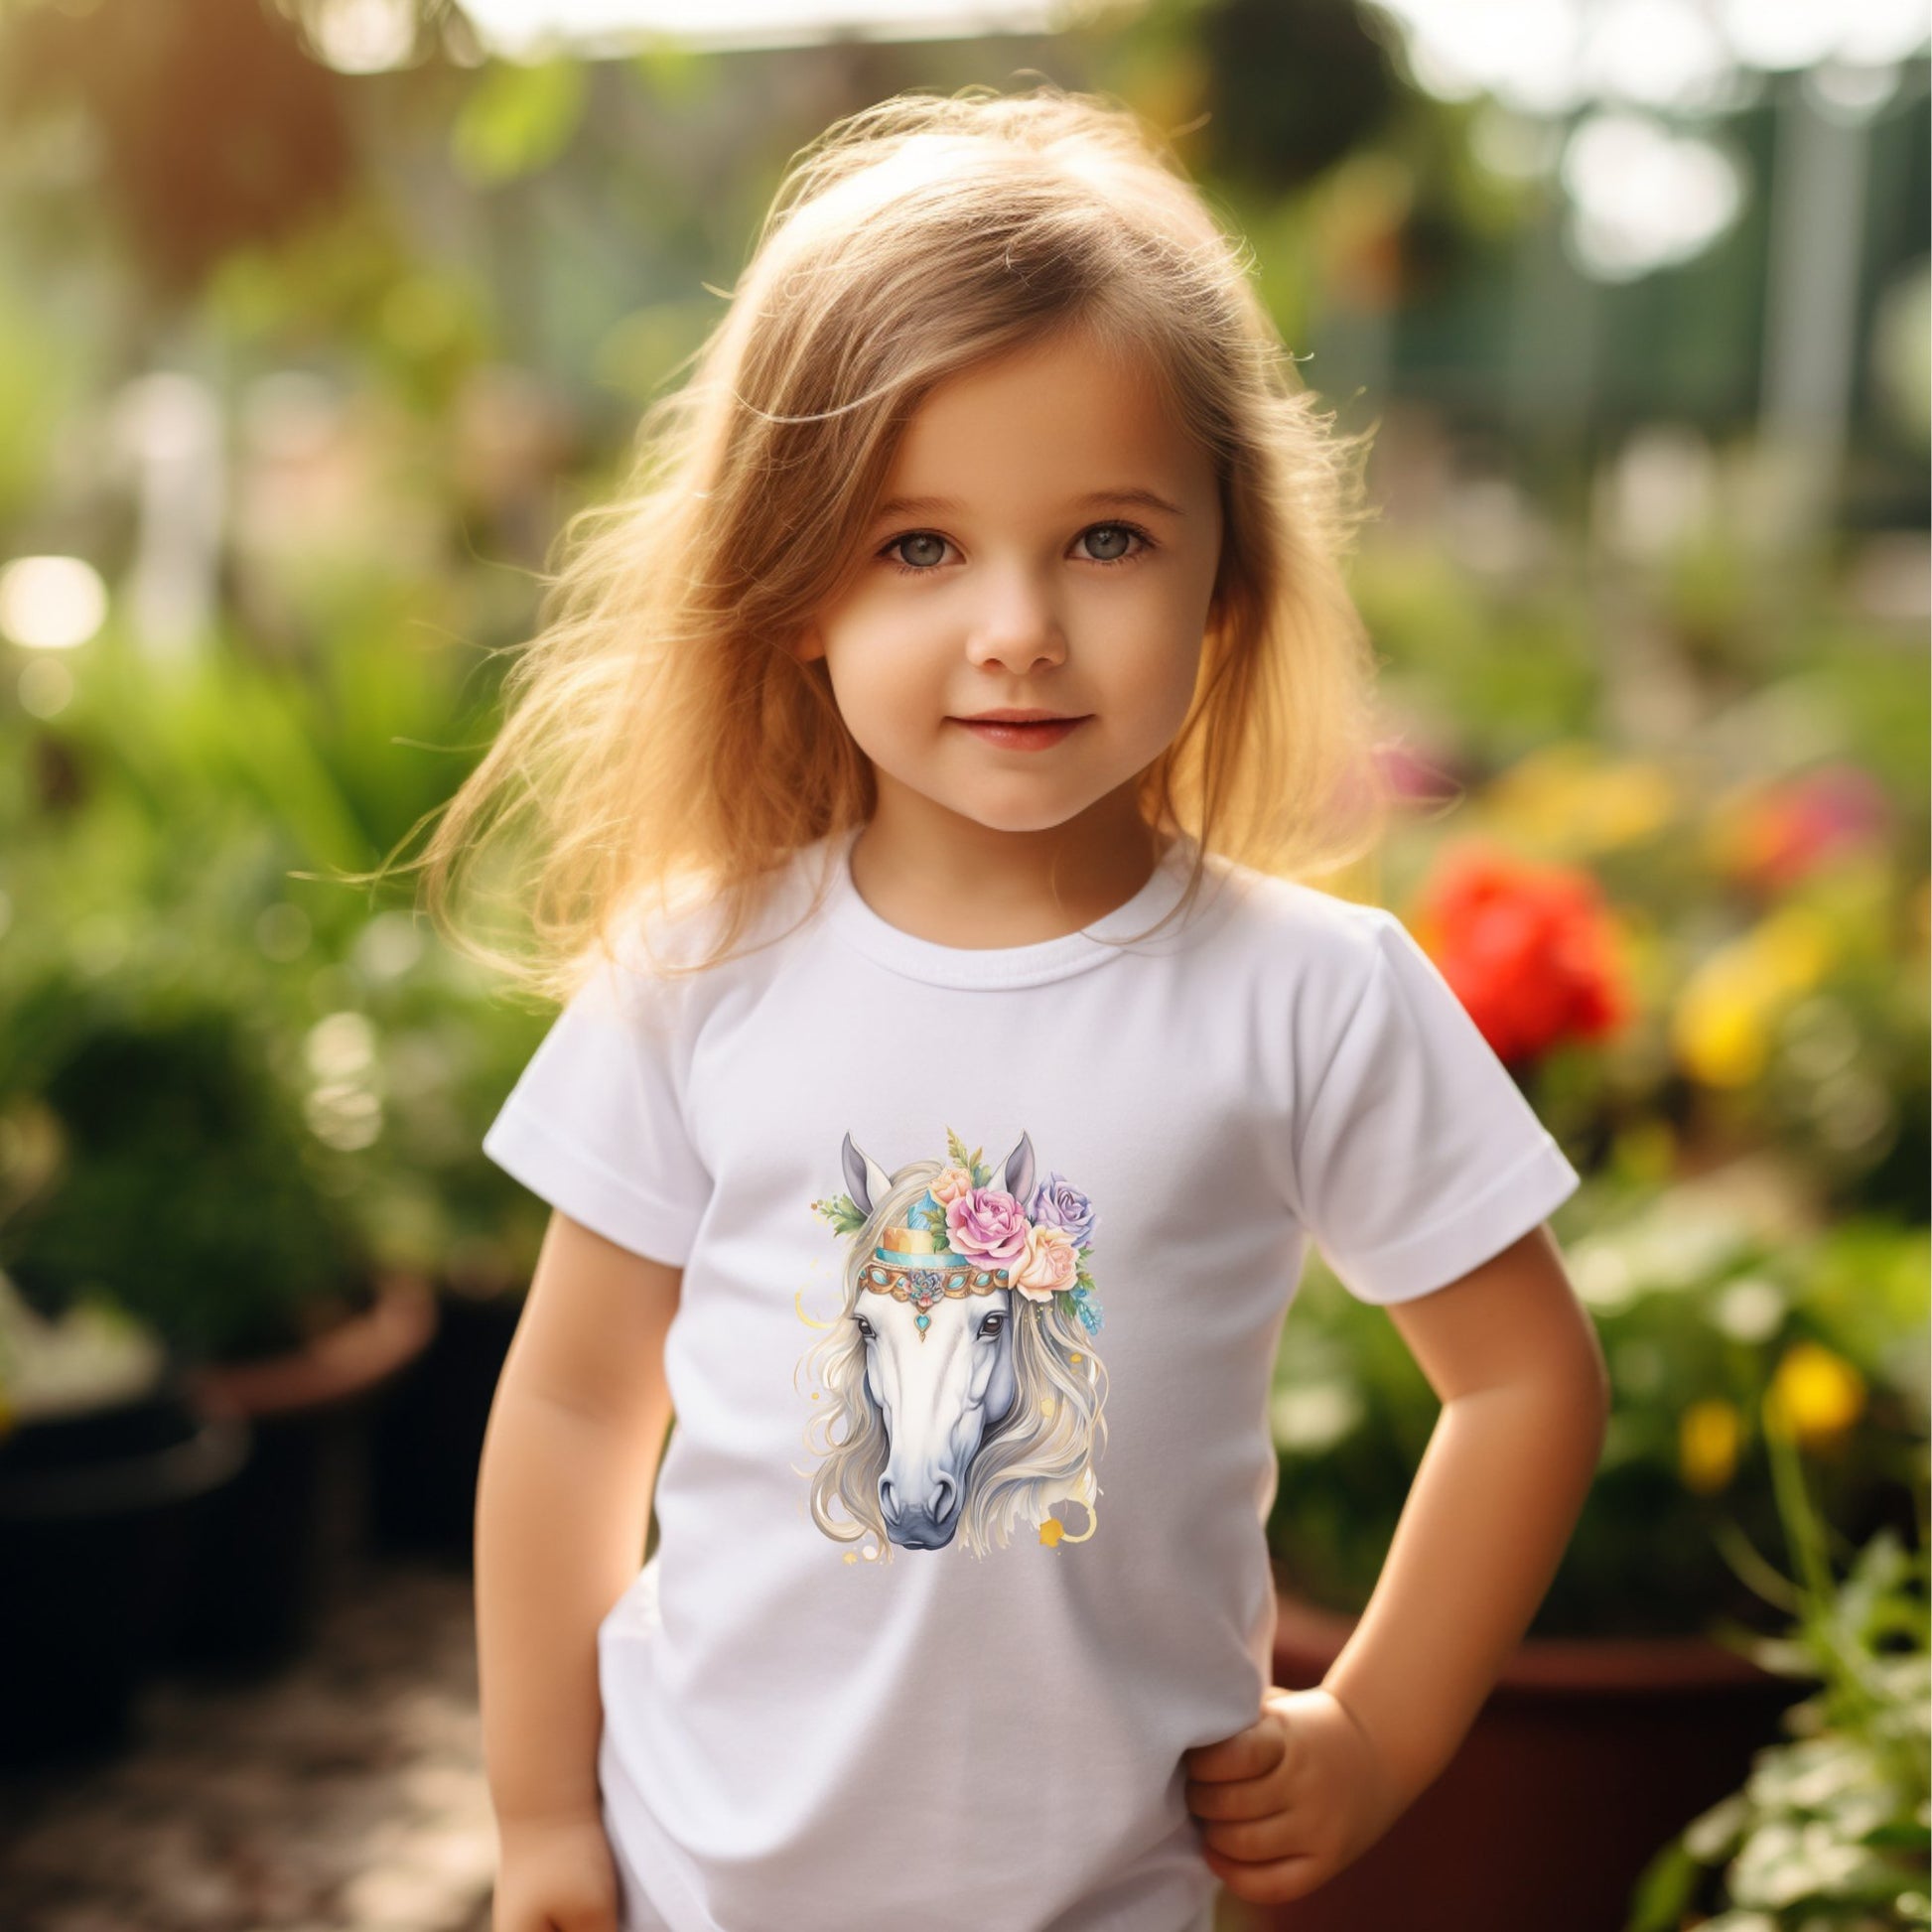 Personalized Toddler Girl Horse Shirt - Horse Youth or Toddler Cotton Tees for Horse Lover Girls - FlooredByArt